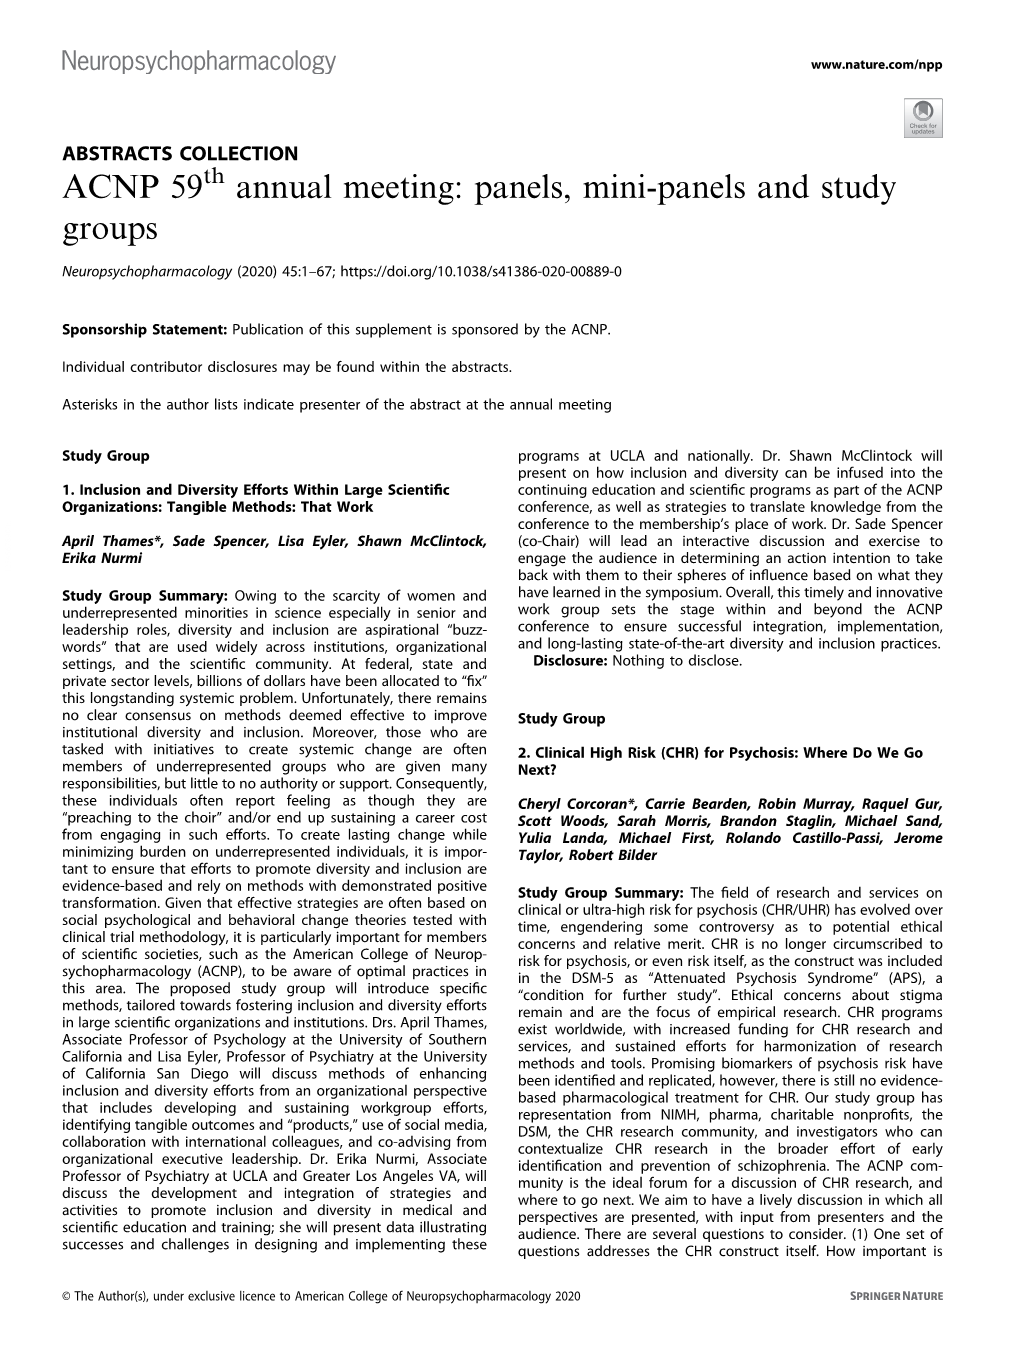 ACNP 59Th Annual Meeting: Panels, Mini-Panels and Study Groups